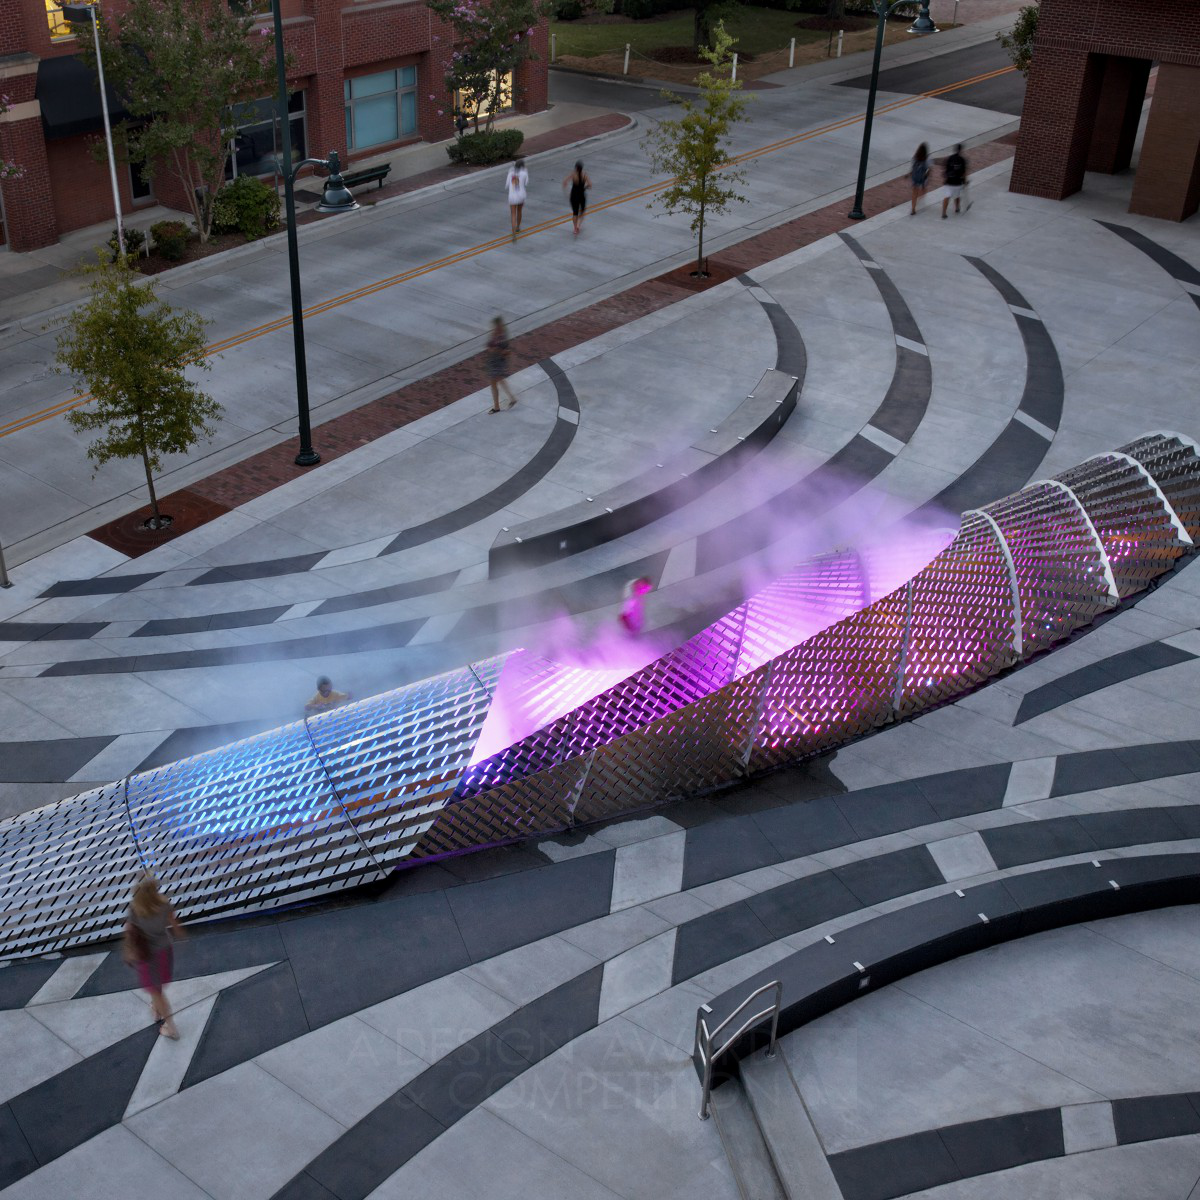 Exhale Public Plaza by Mikyoung Kim